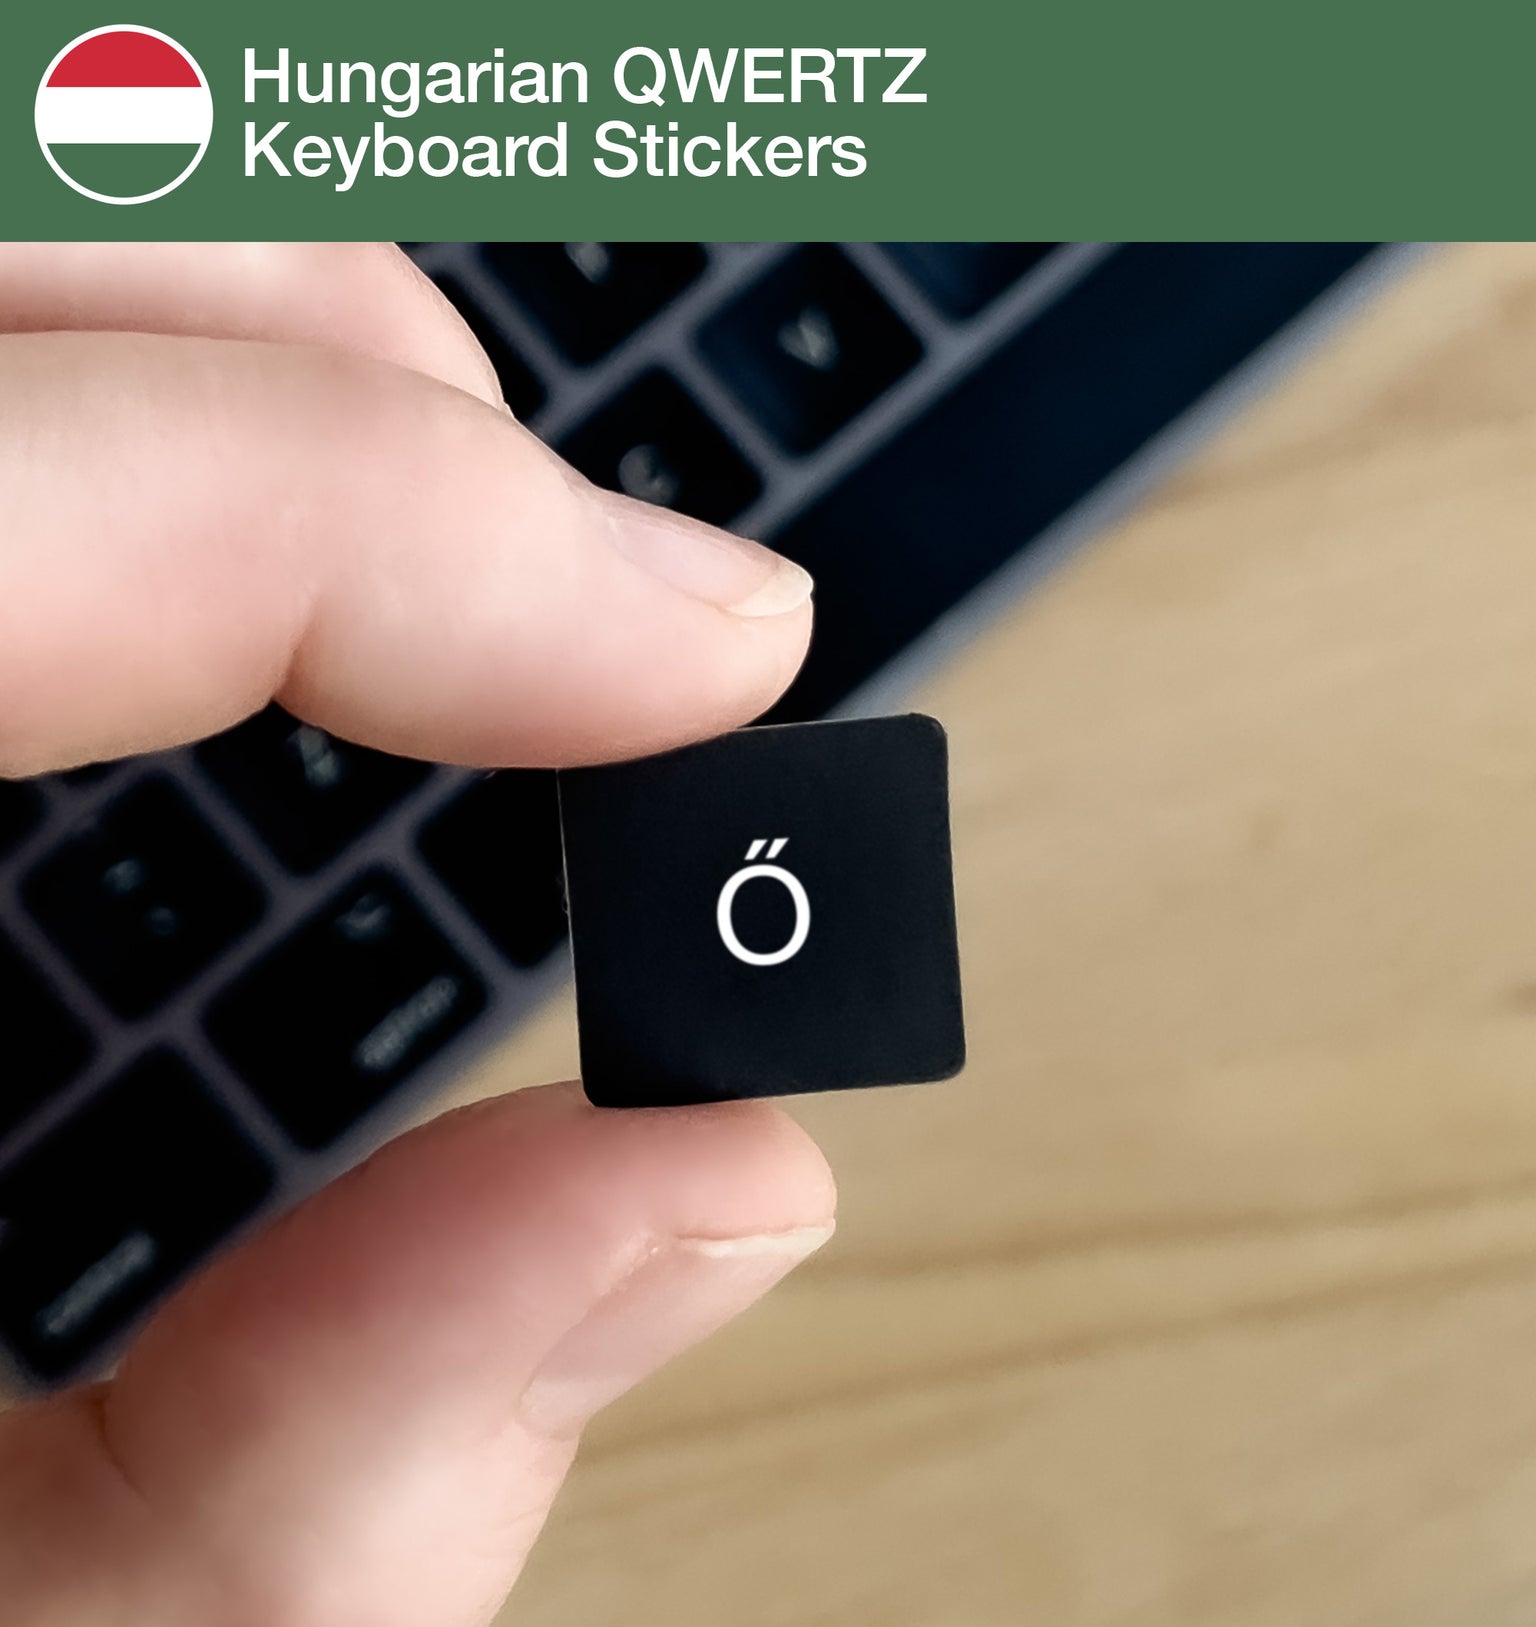 Hungarian (QWERTZ) Keyboard Stickers with Hungarian layout